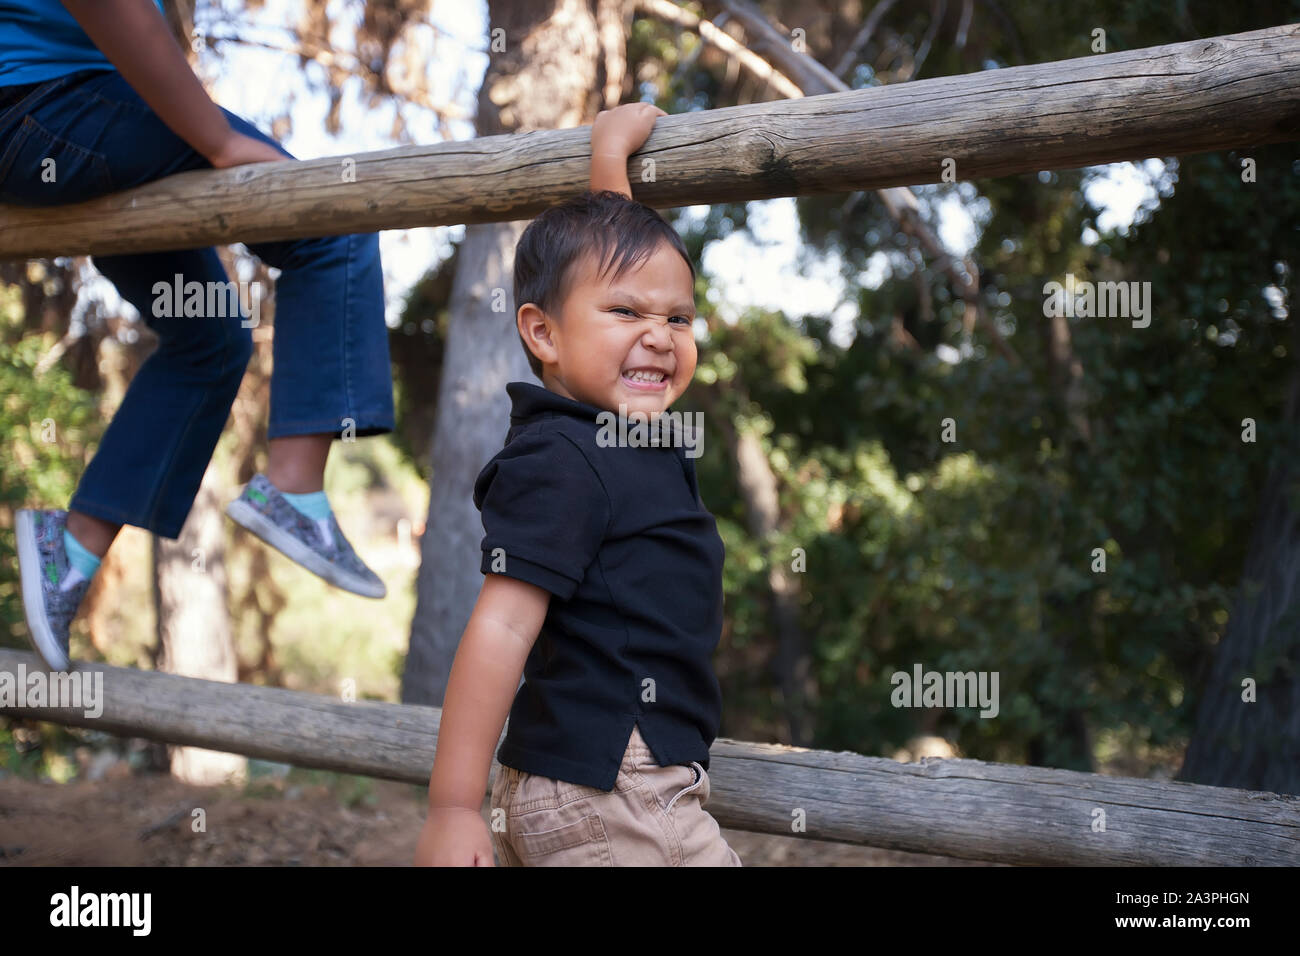 A happy little brother who wants to climb up a fence to sit together with his older sister in a woodland park. Stock Photo